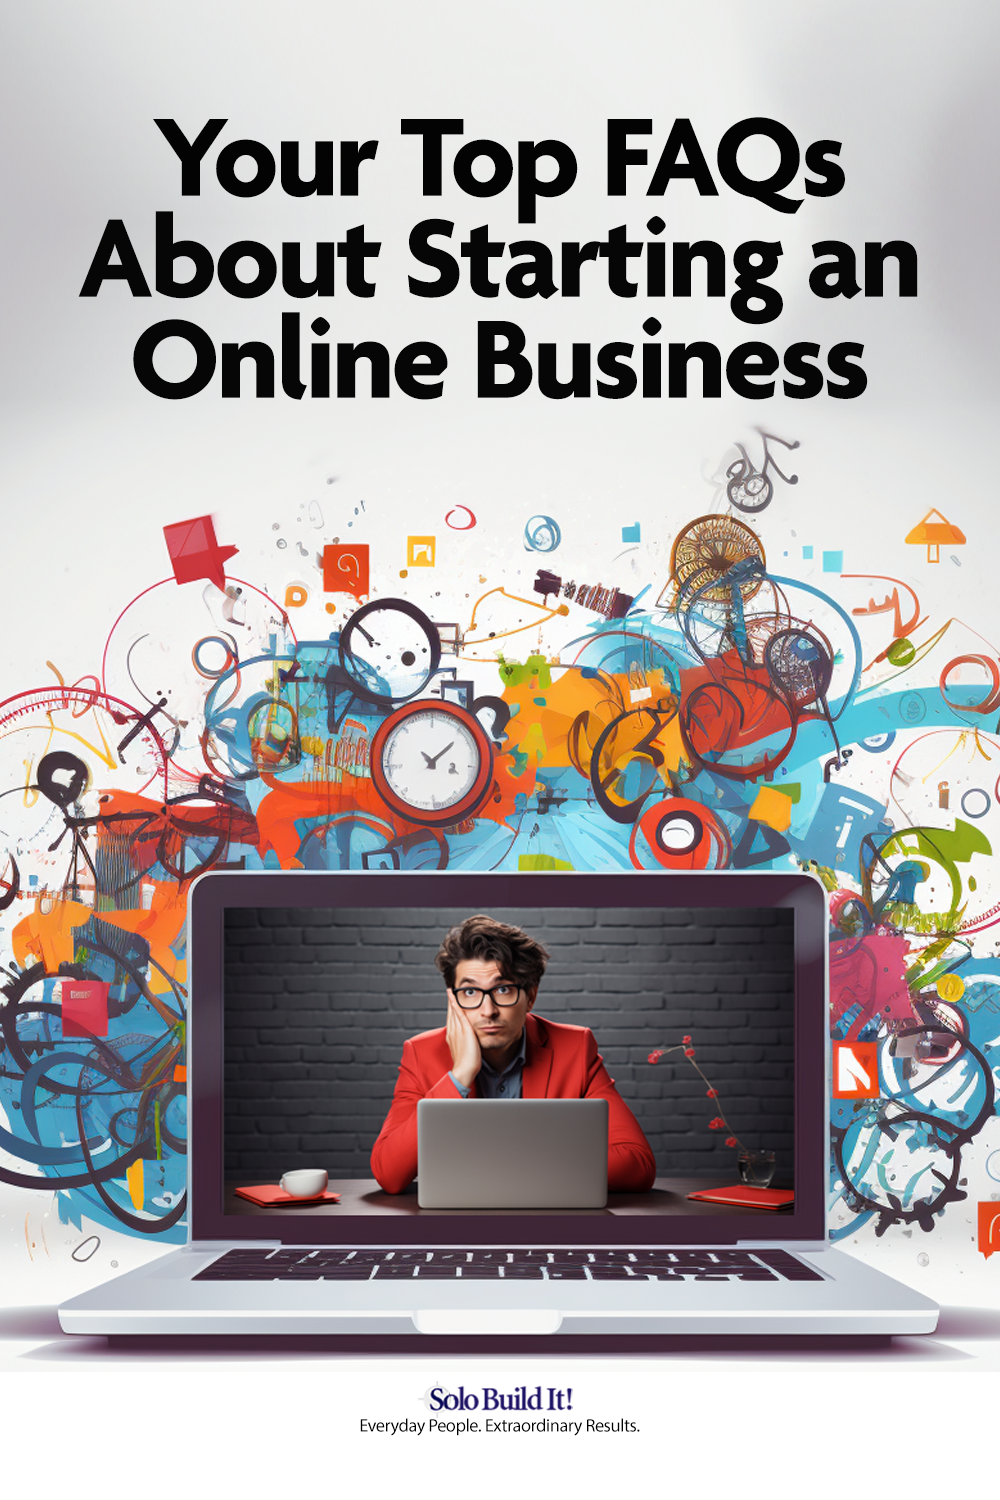 Starting an Online Business<br>Frequently Asked Questions - Answered